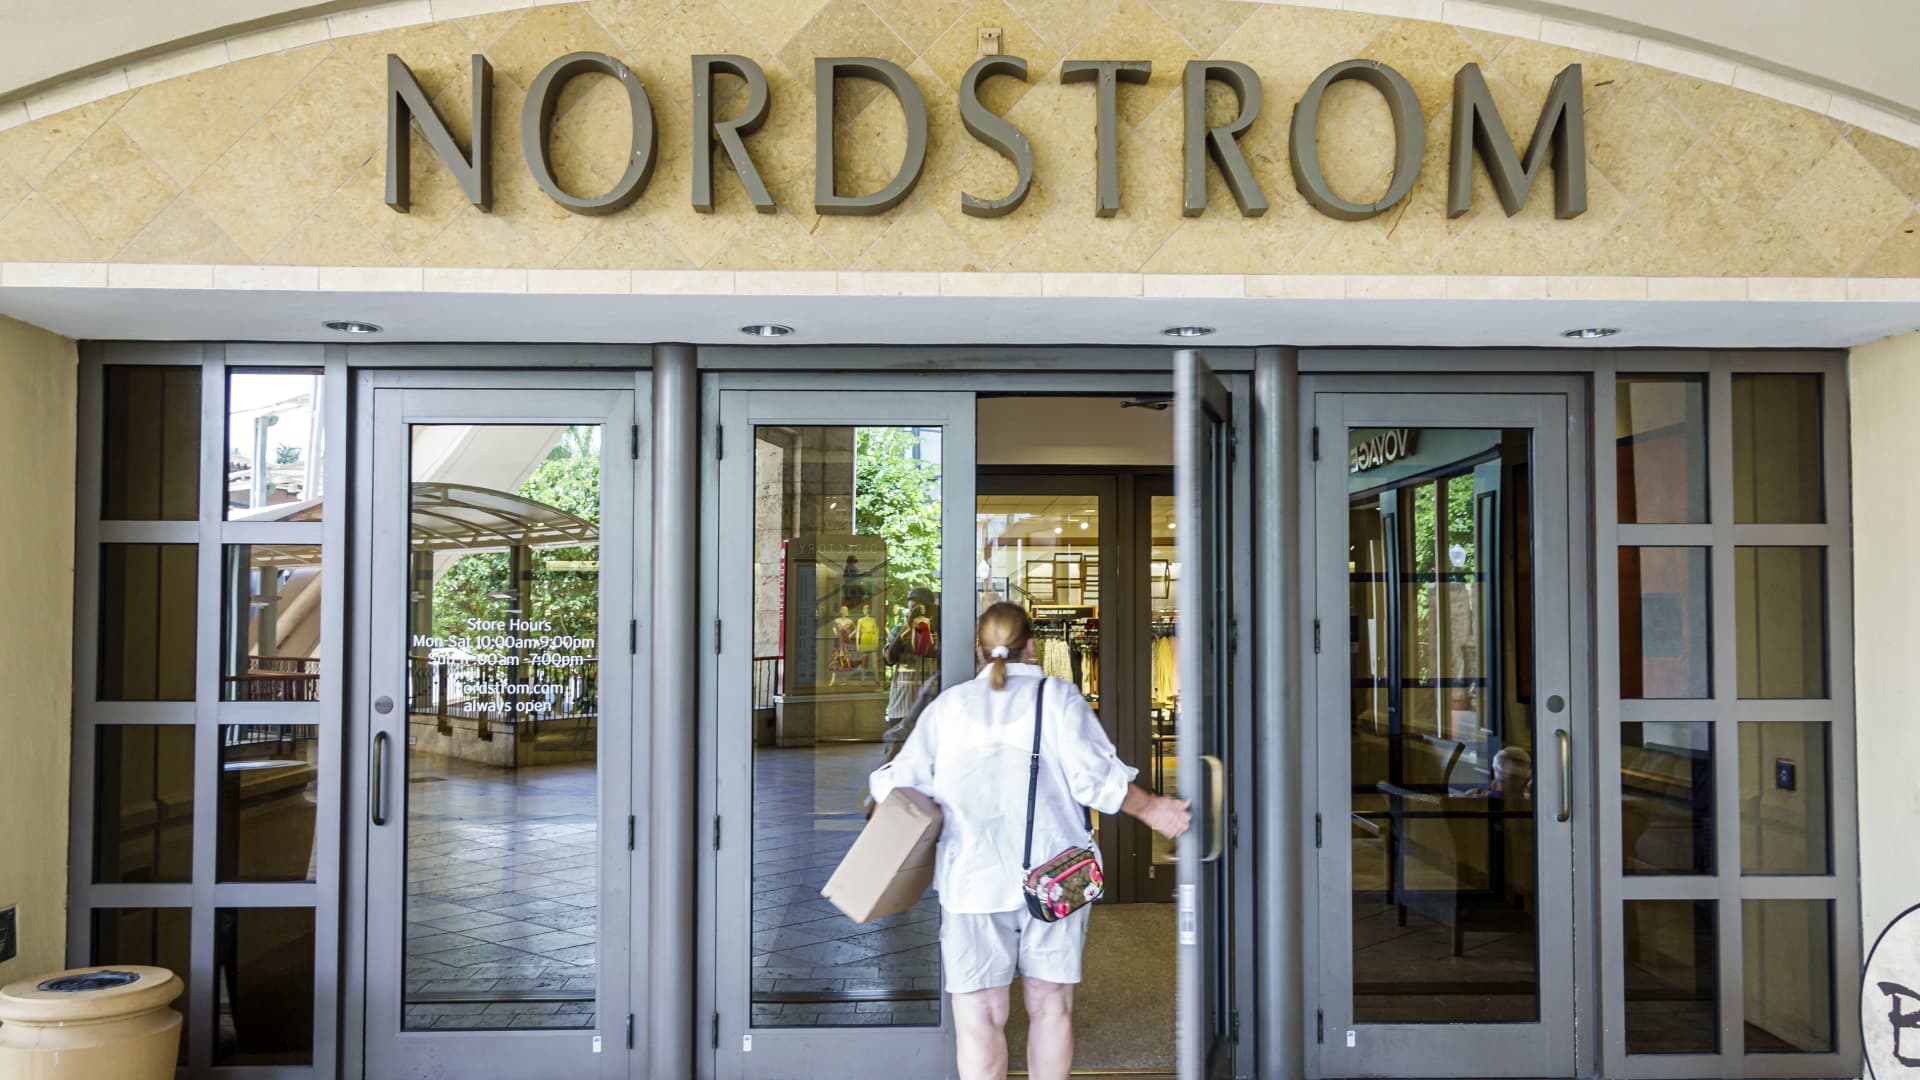 Nordstrom earnings top expectations, retailer says it's winding down Canada operations